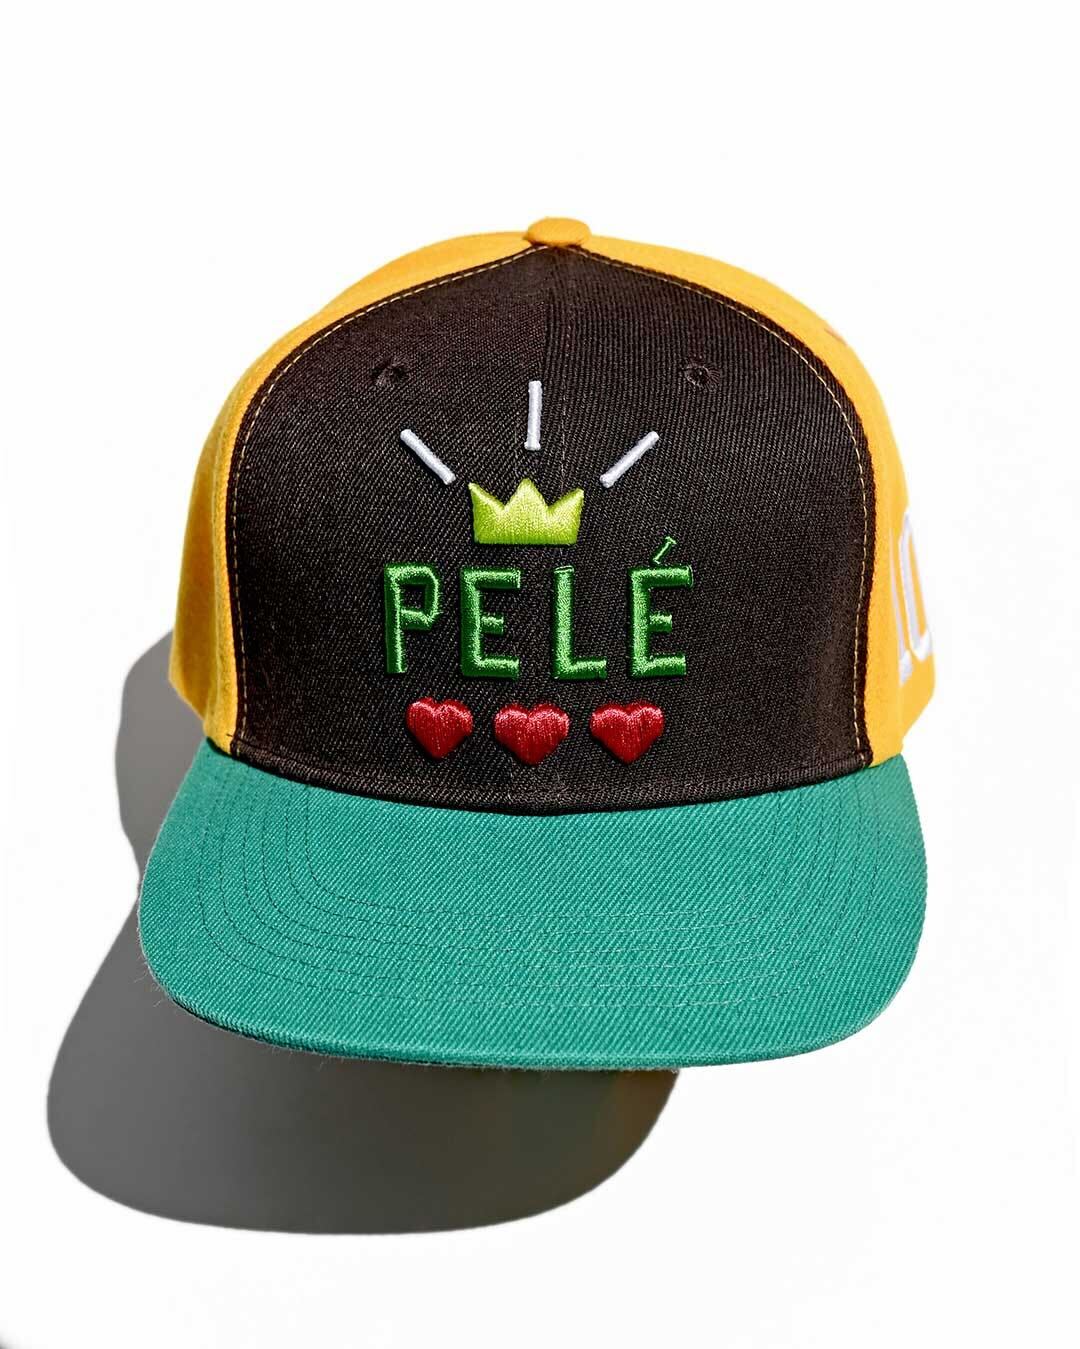 Pelé Crown Snapback Hat - Roots of Fight Canada